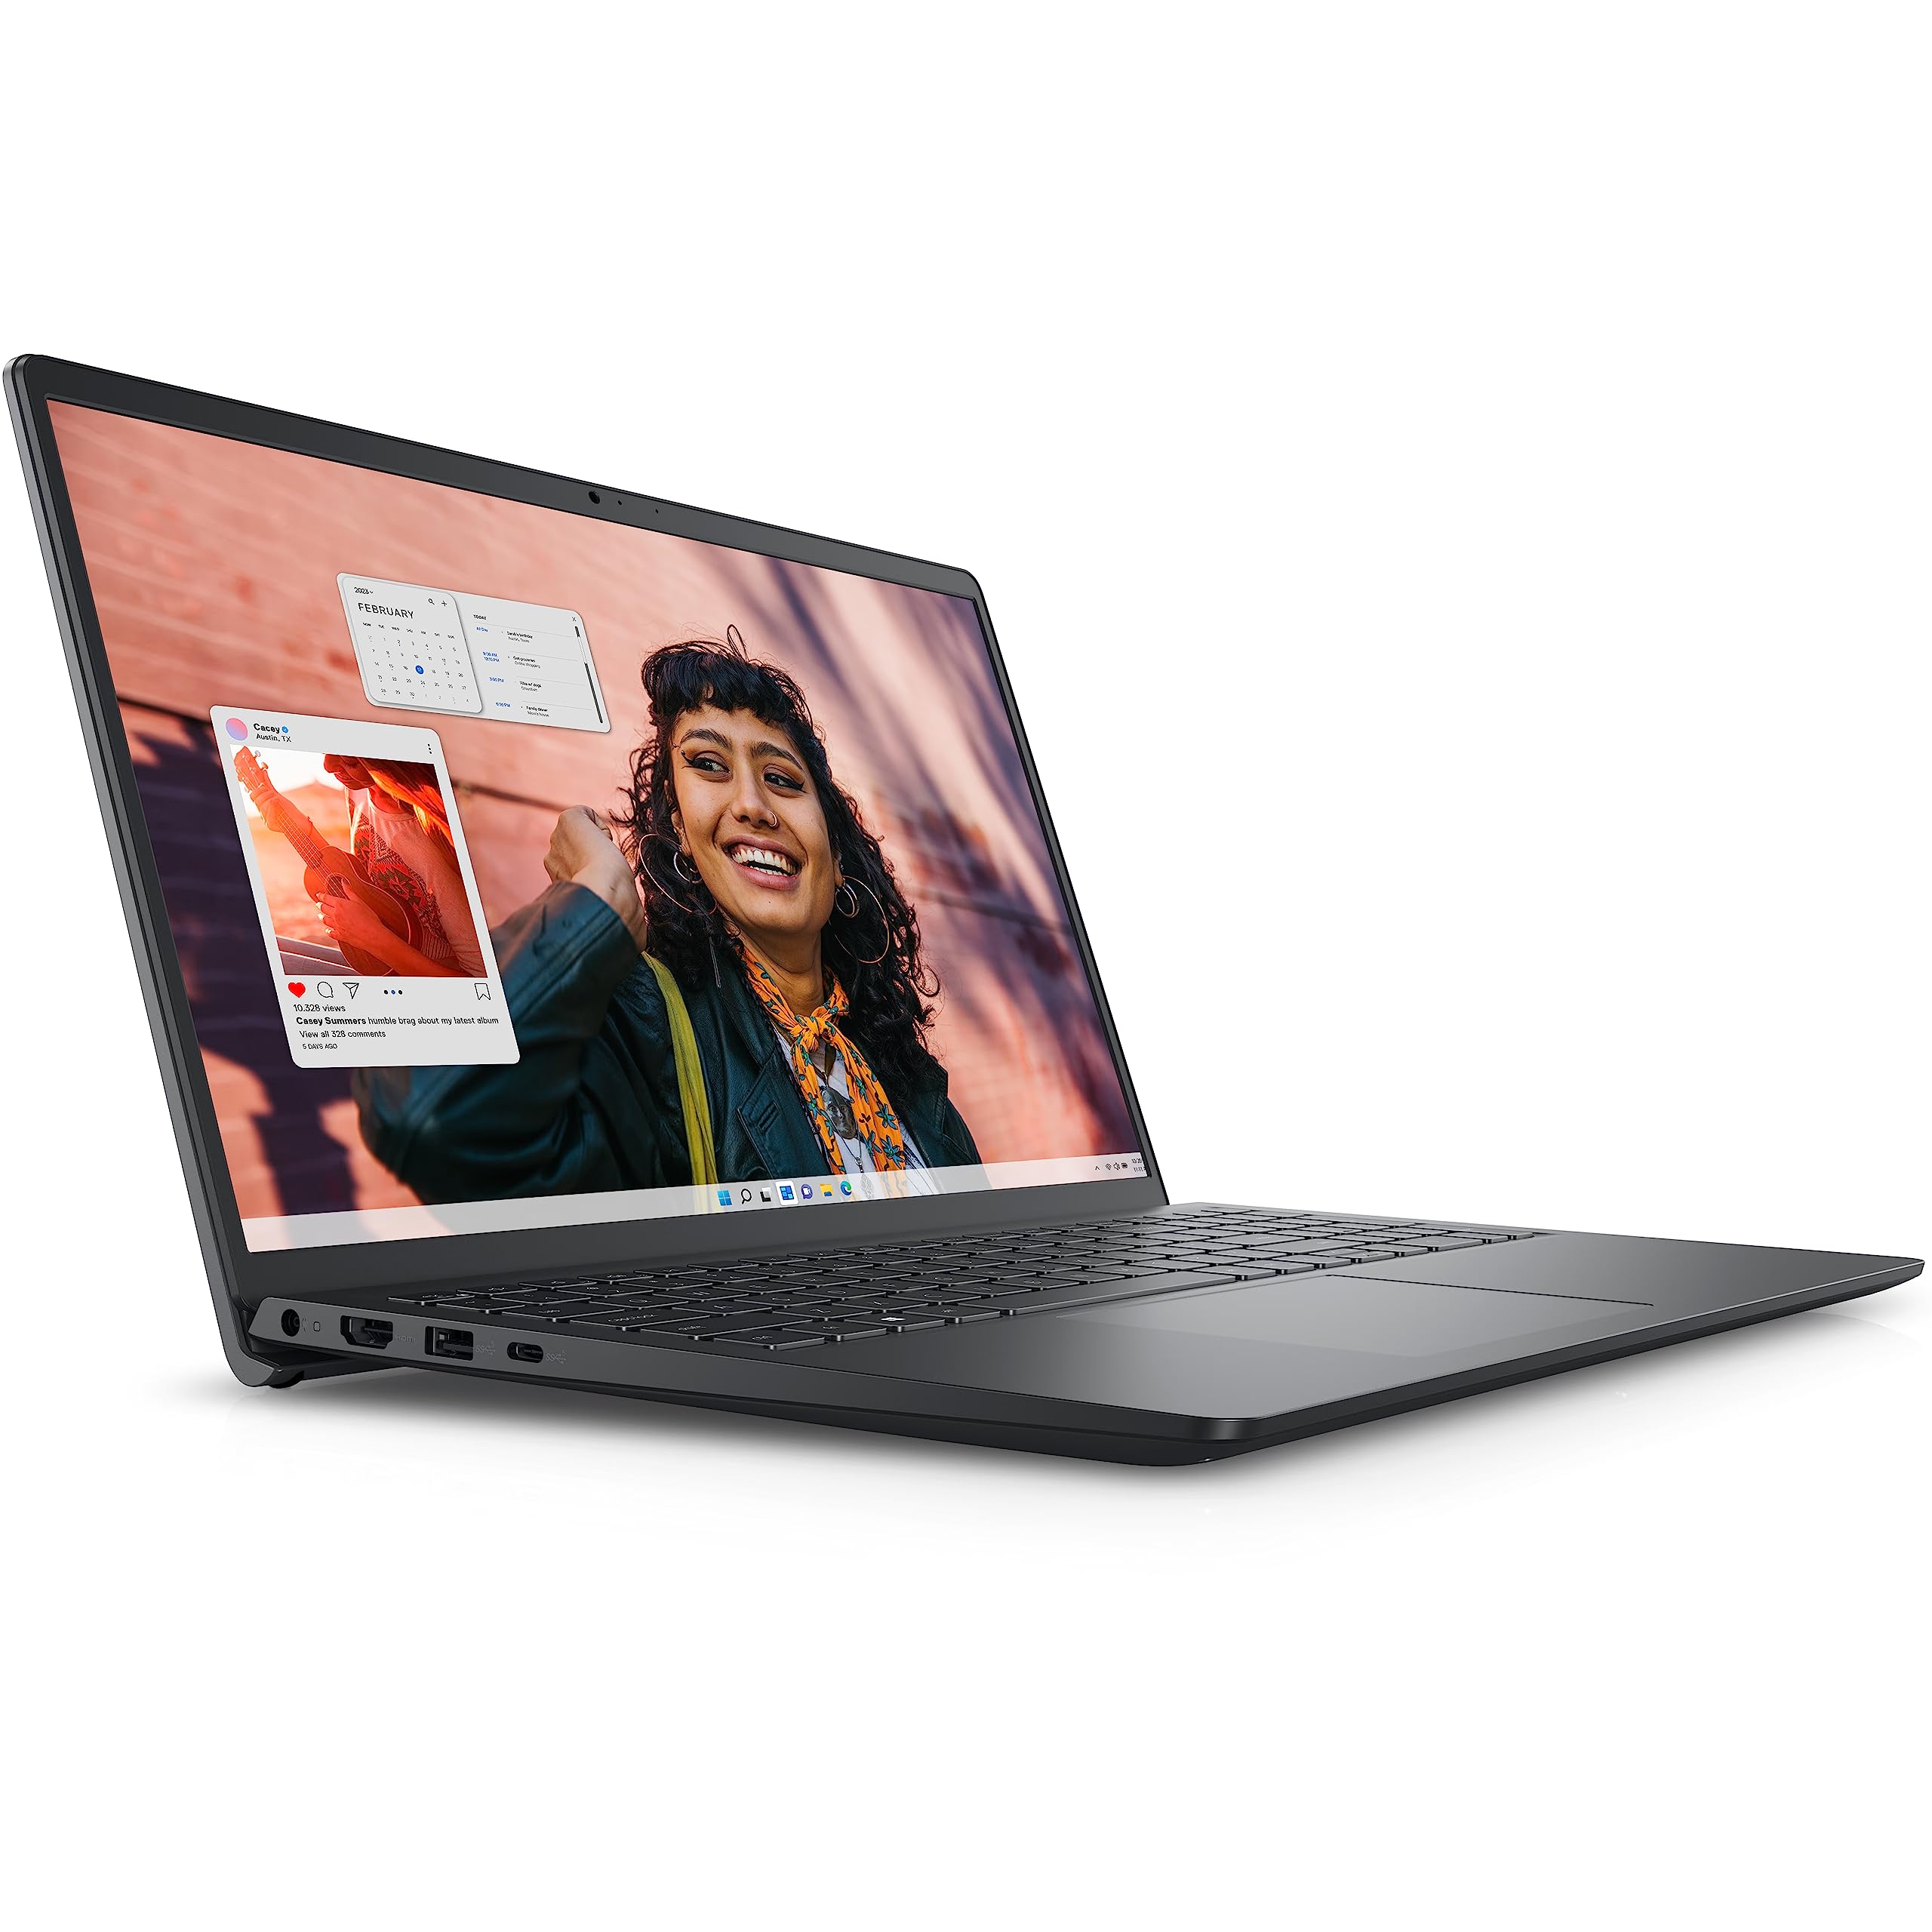 Dell 2023 Inspiron 15 3530 15.6" Touchscreen FHD Business Laptop Computer, 13th Gen Intel 10-Core i7-1355U up to 5.0GHz, 16GB DDR4 RAM, 1TB PCIe SSD, WiFi 6, Bluetooth, Carbon Black, Windows 11 Pro